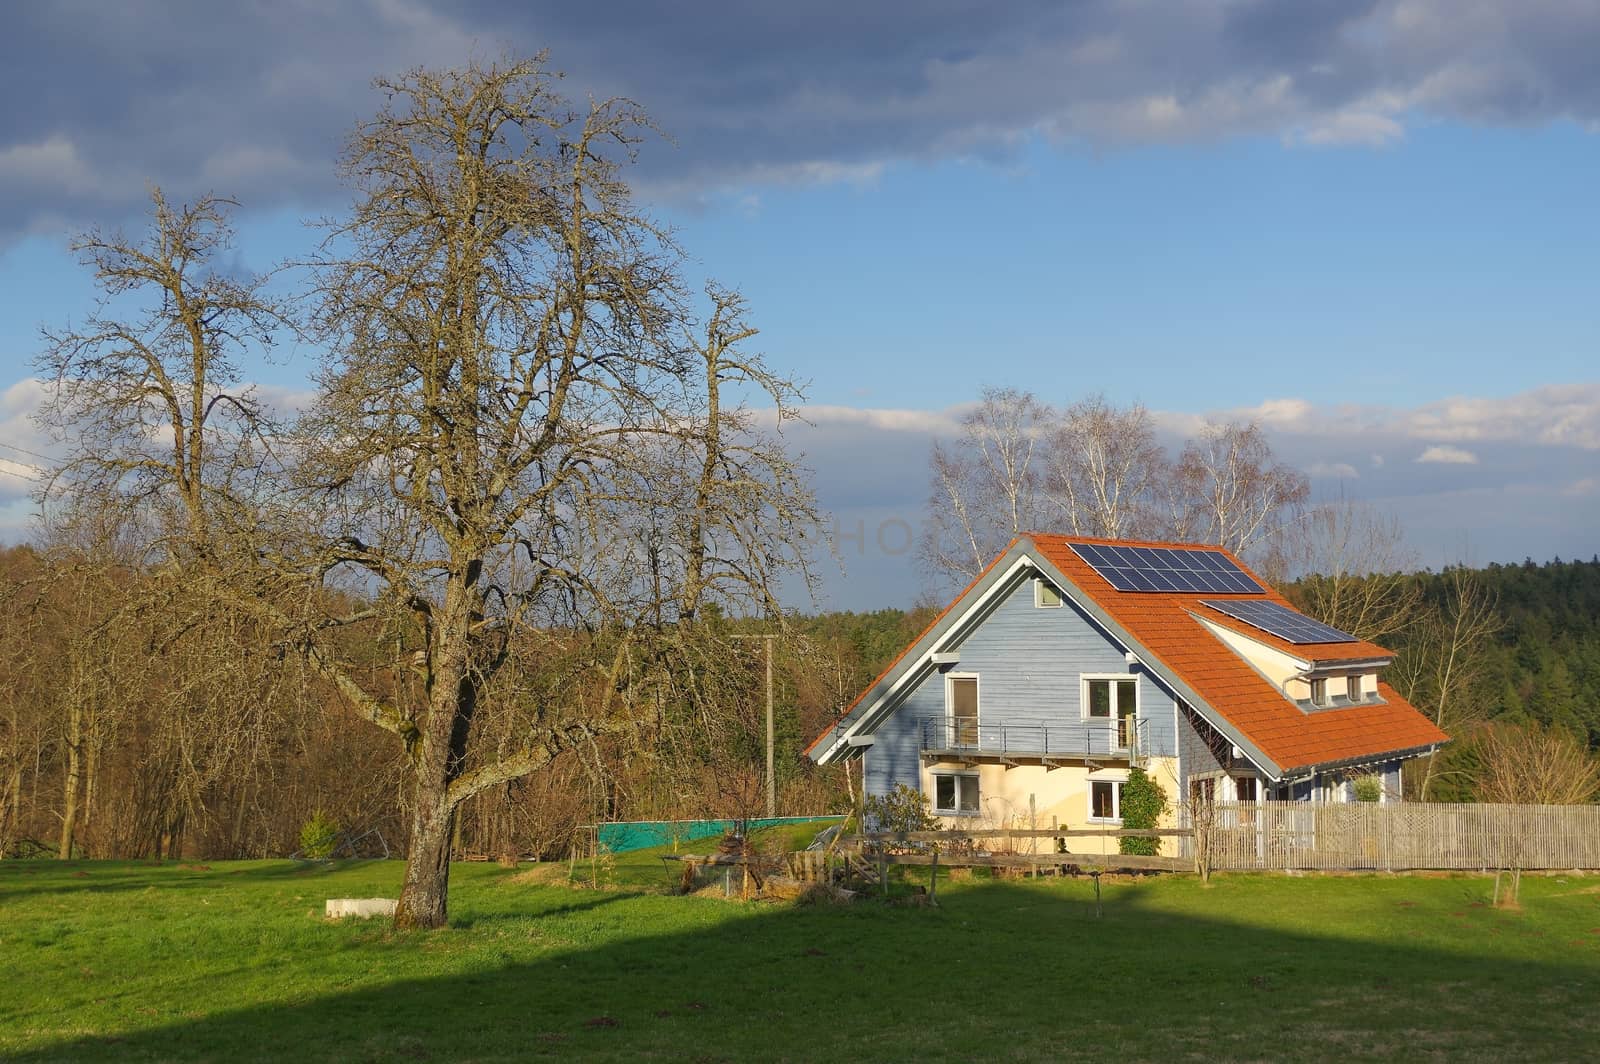 German rural landscape with wooden house near Black Forest Baden Wuertemberg, Schoemberg in Germany by evolutionnow